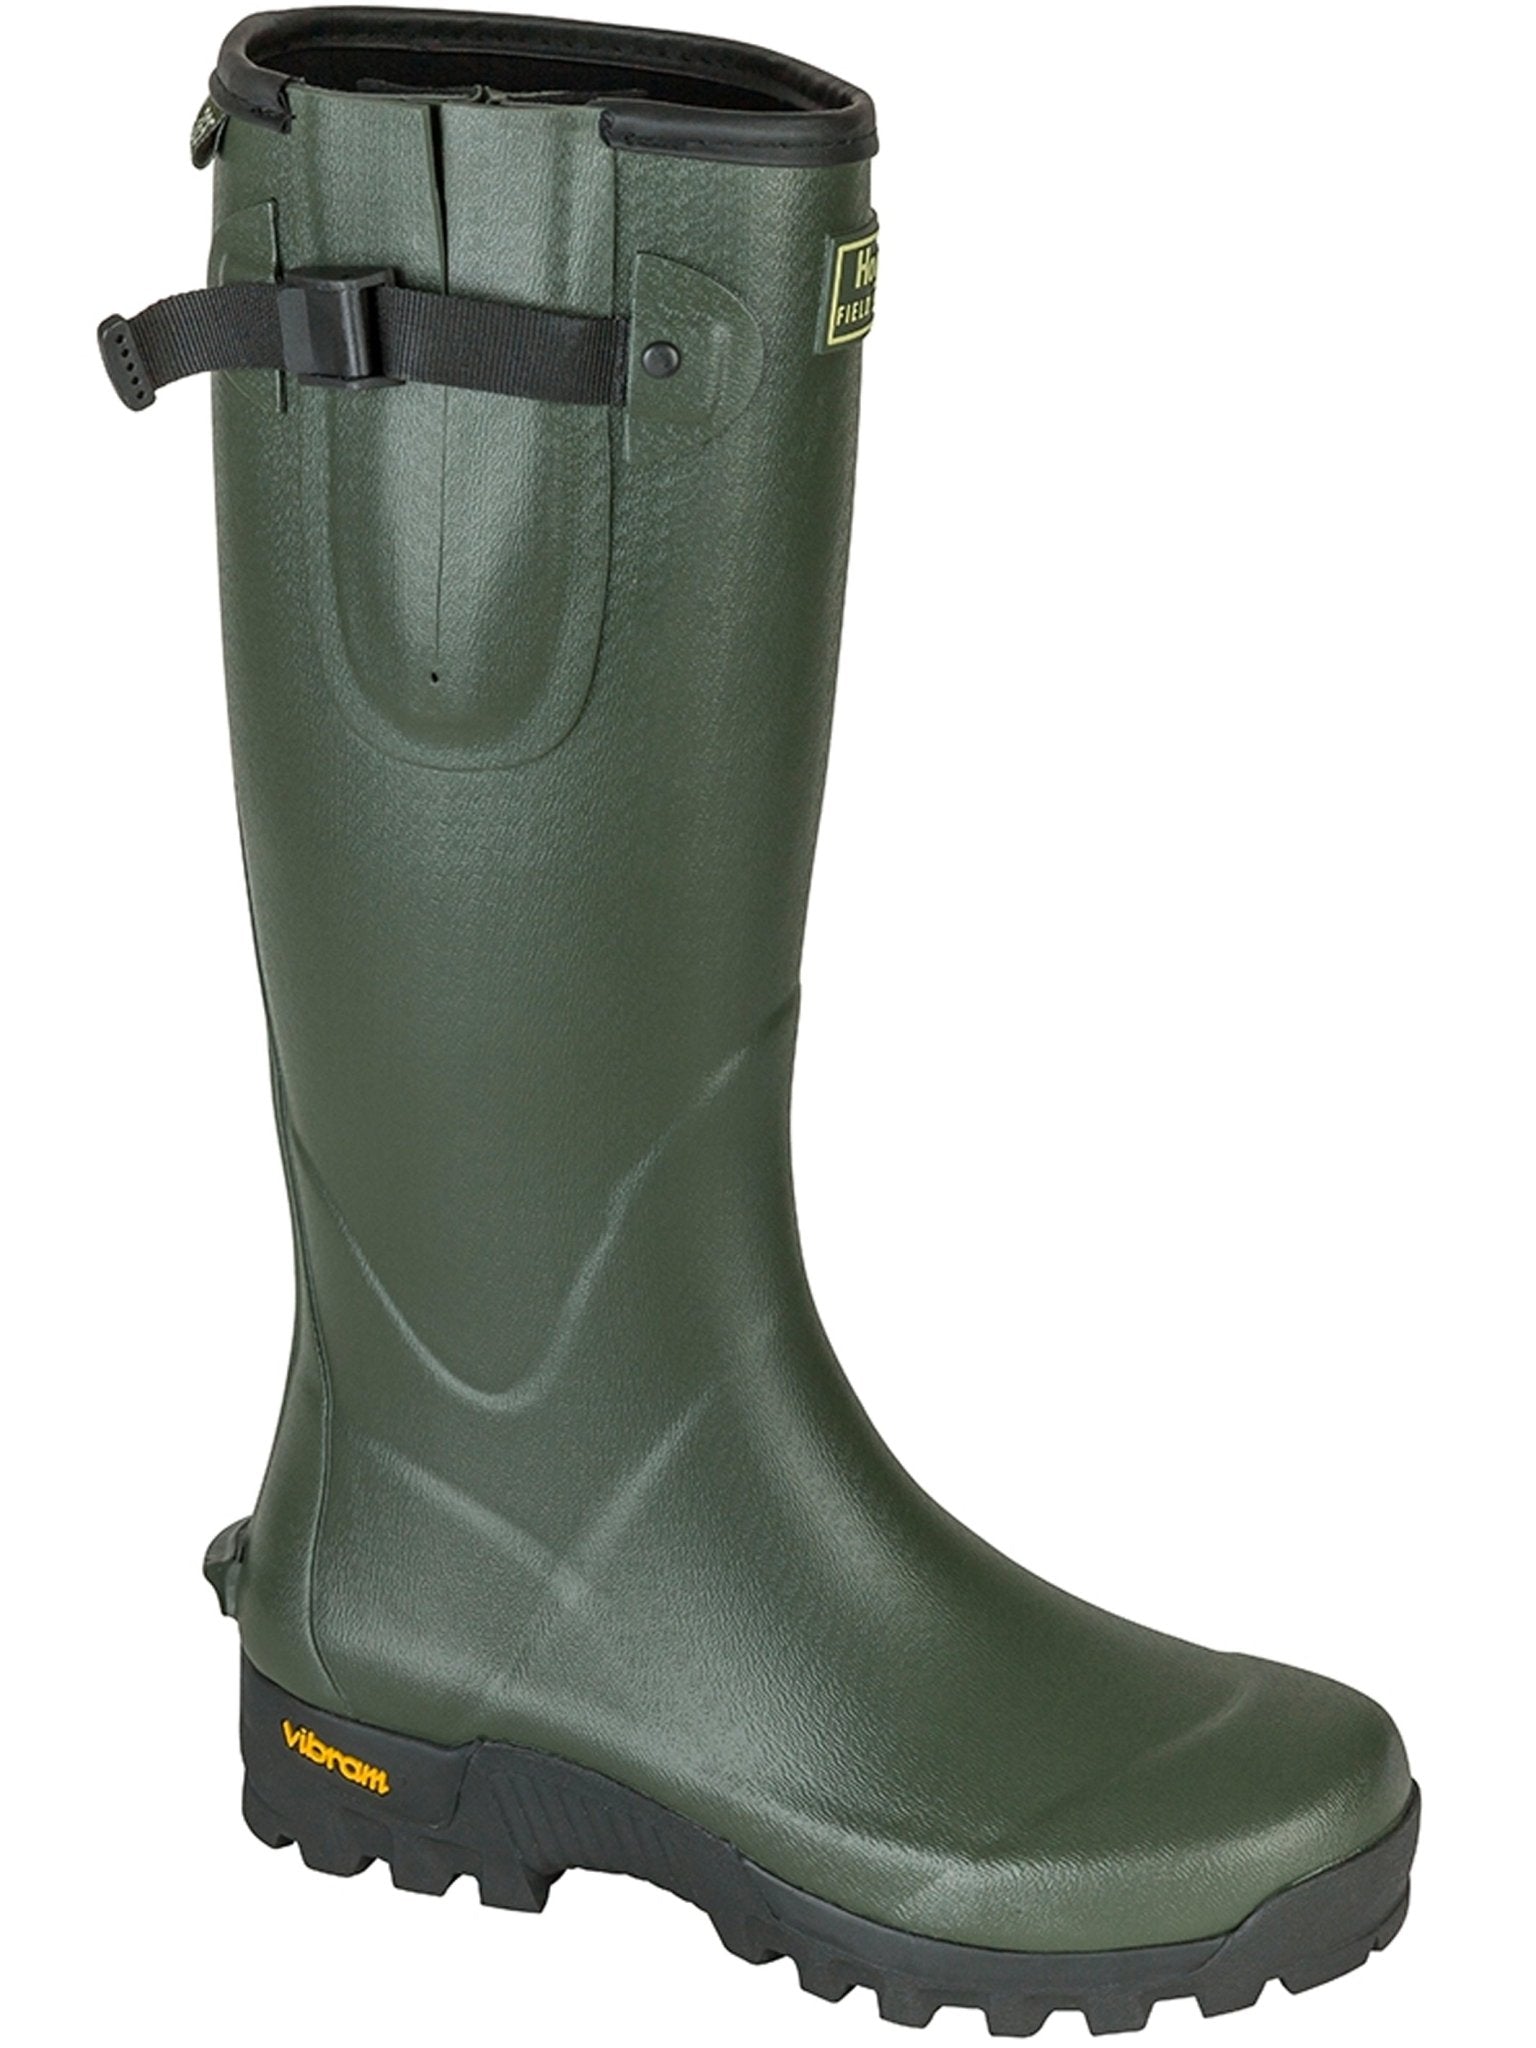 4elementsclothingHoggs of FifeHoggs Of Fife - Wellington boot Field Sport 365 welly and rain boot Rubber bootBootsF365/GR/040